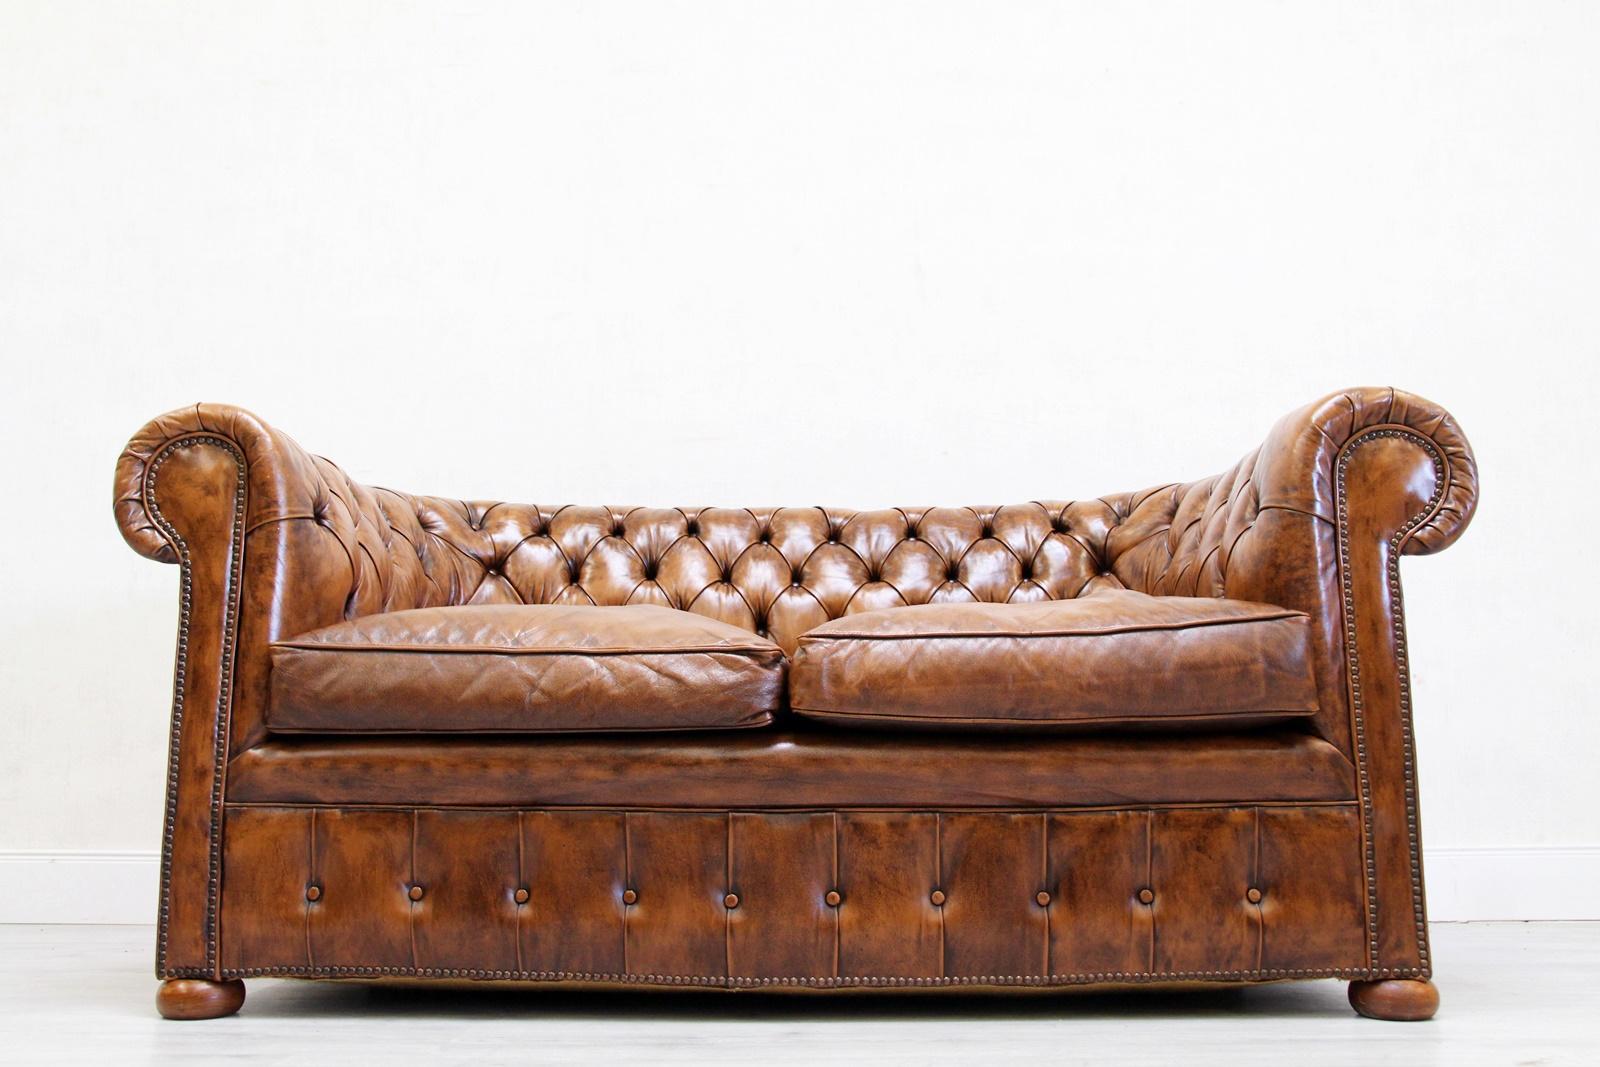 Chesterfield sofa leather antique vintage couch English Chippendale Chesterfield Genuine leather Two-seater sofa in original design
Very comfortable and with beautiful patina
Condition: The sofa is in a very good condition
sofa
Measures: Height